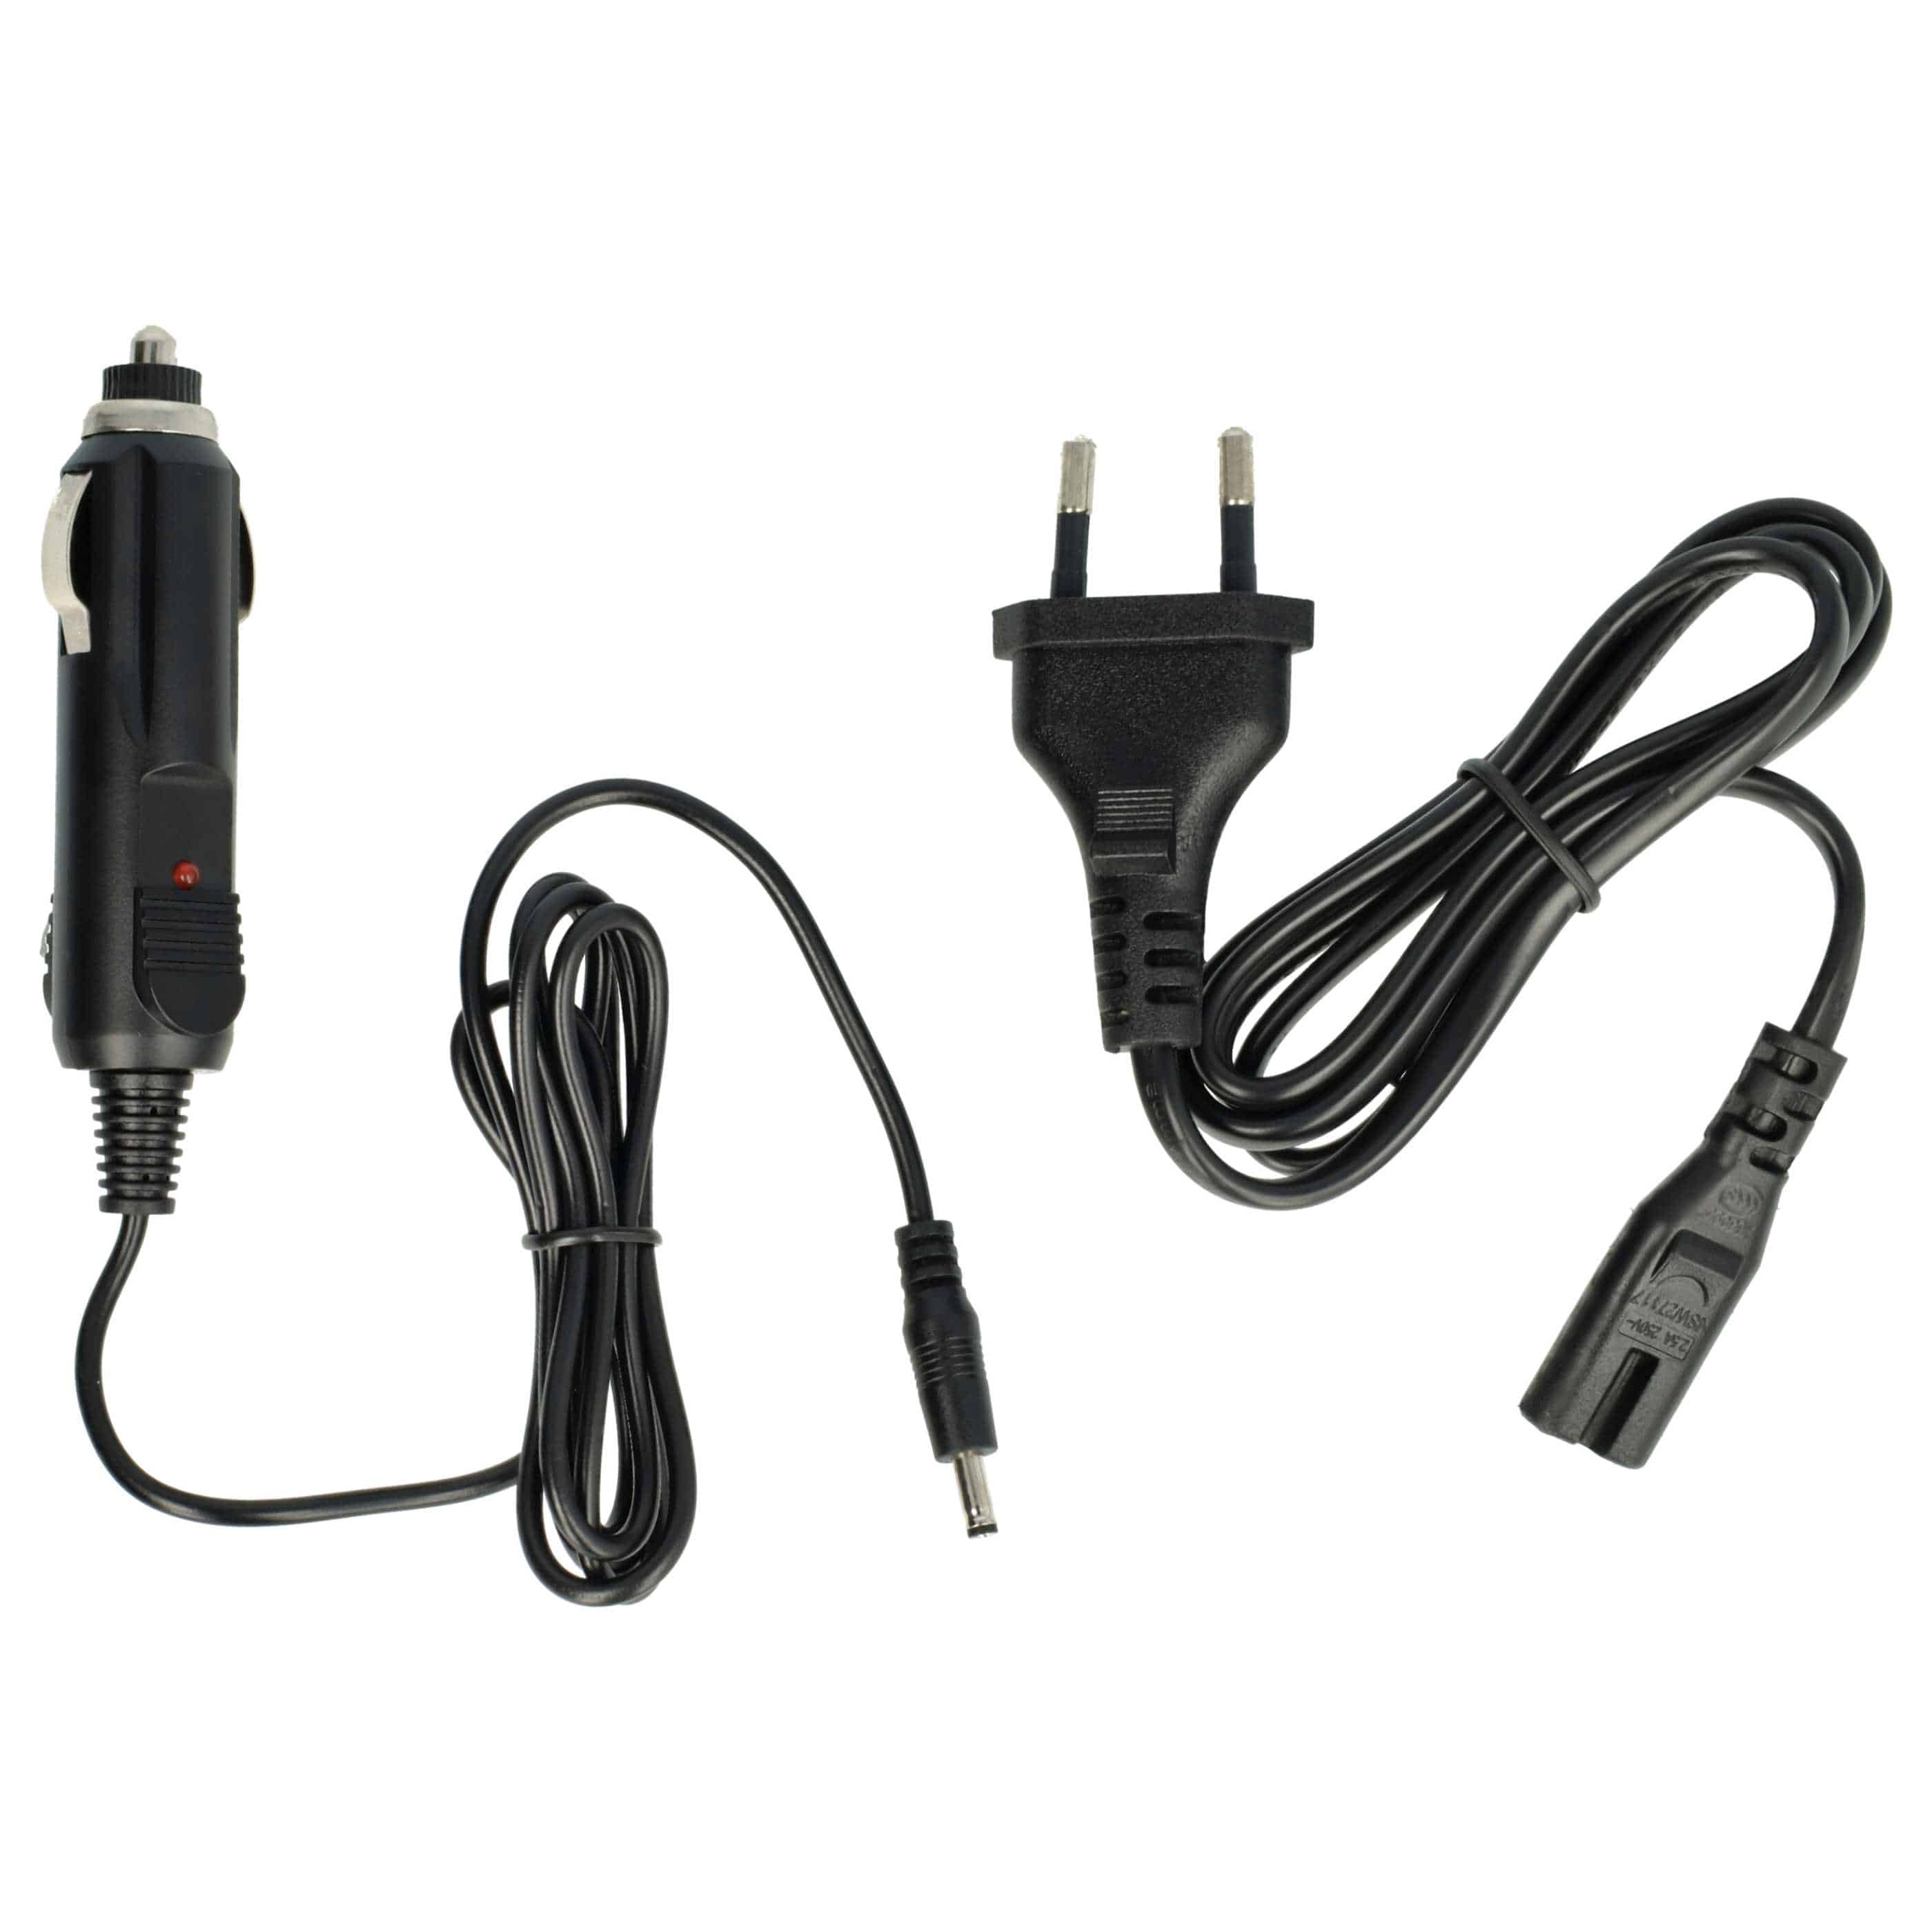 Battery Charger suitable for Sony NP-BN1 Camera etc. - 0.6 A, 4.2 V